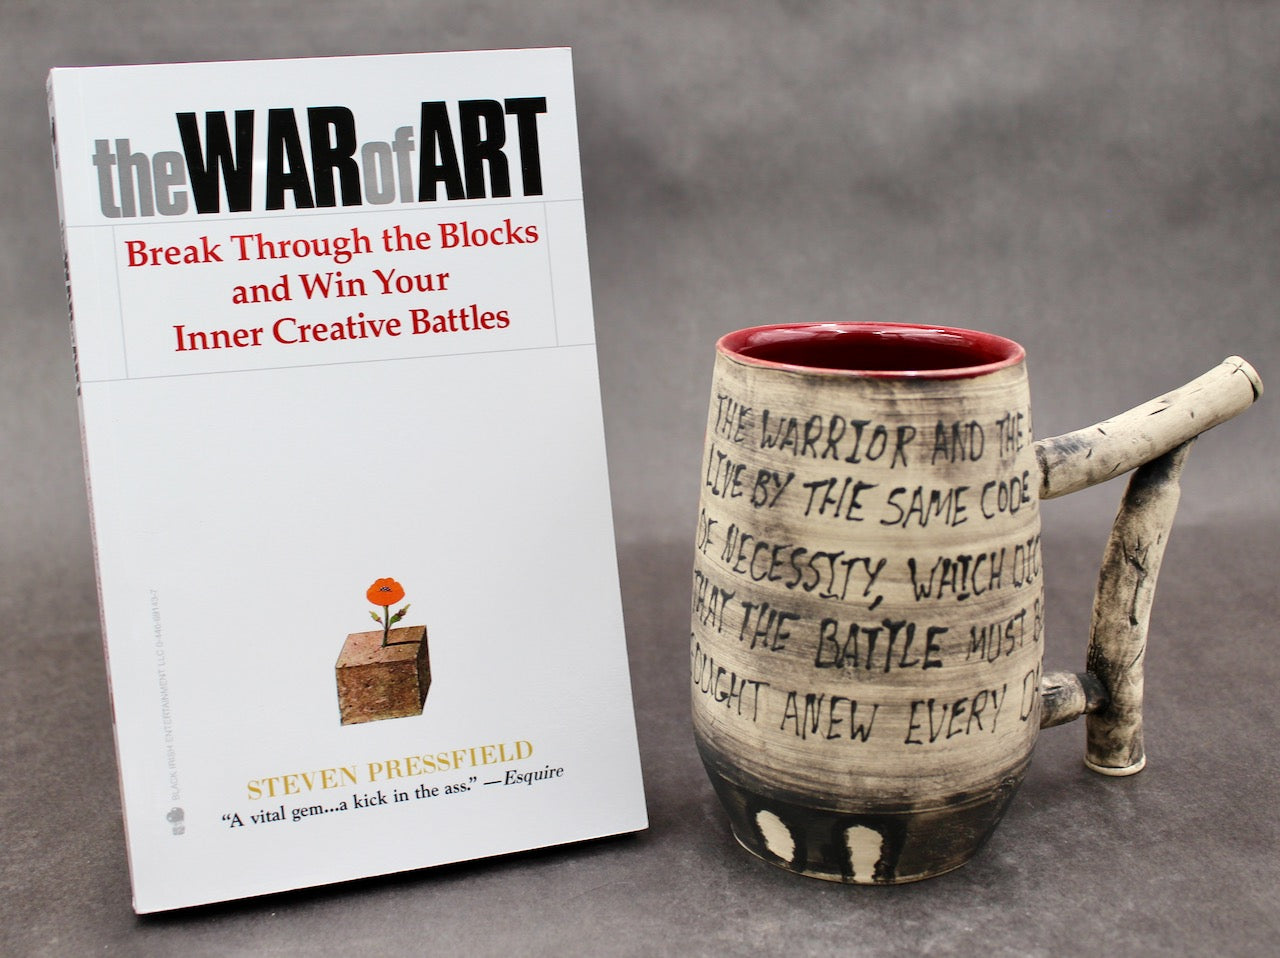 One Bullet Flower Mug, Matte Surface, and One Autographed Book, "The War of Art" by Steven Pressfield (SK7805)